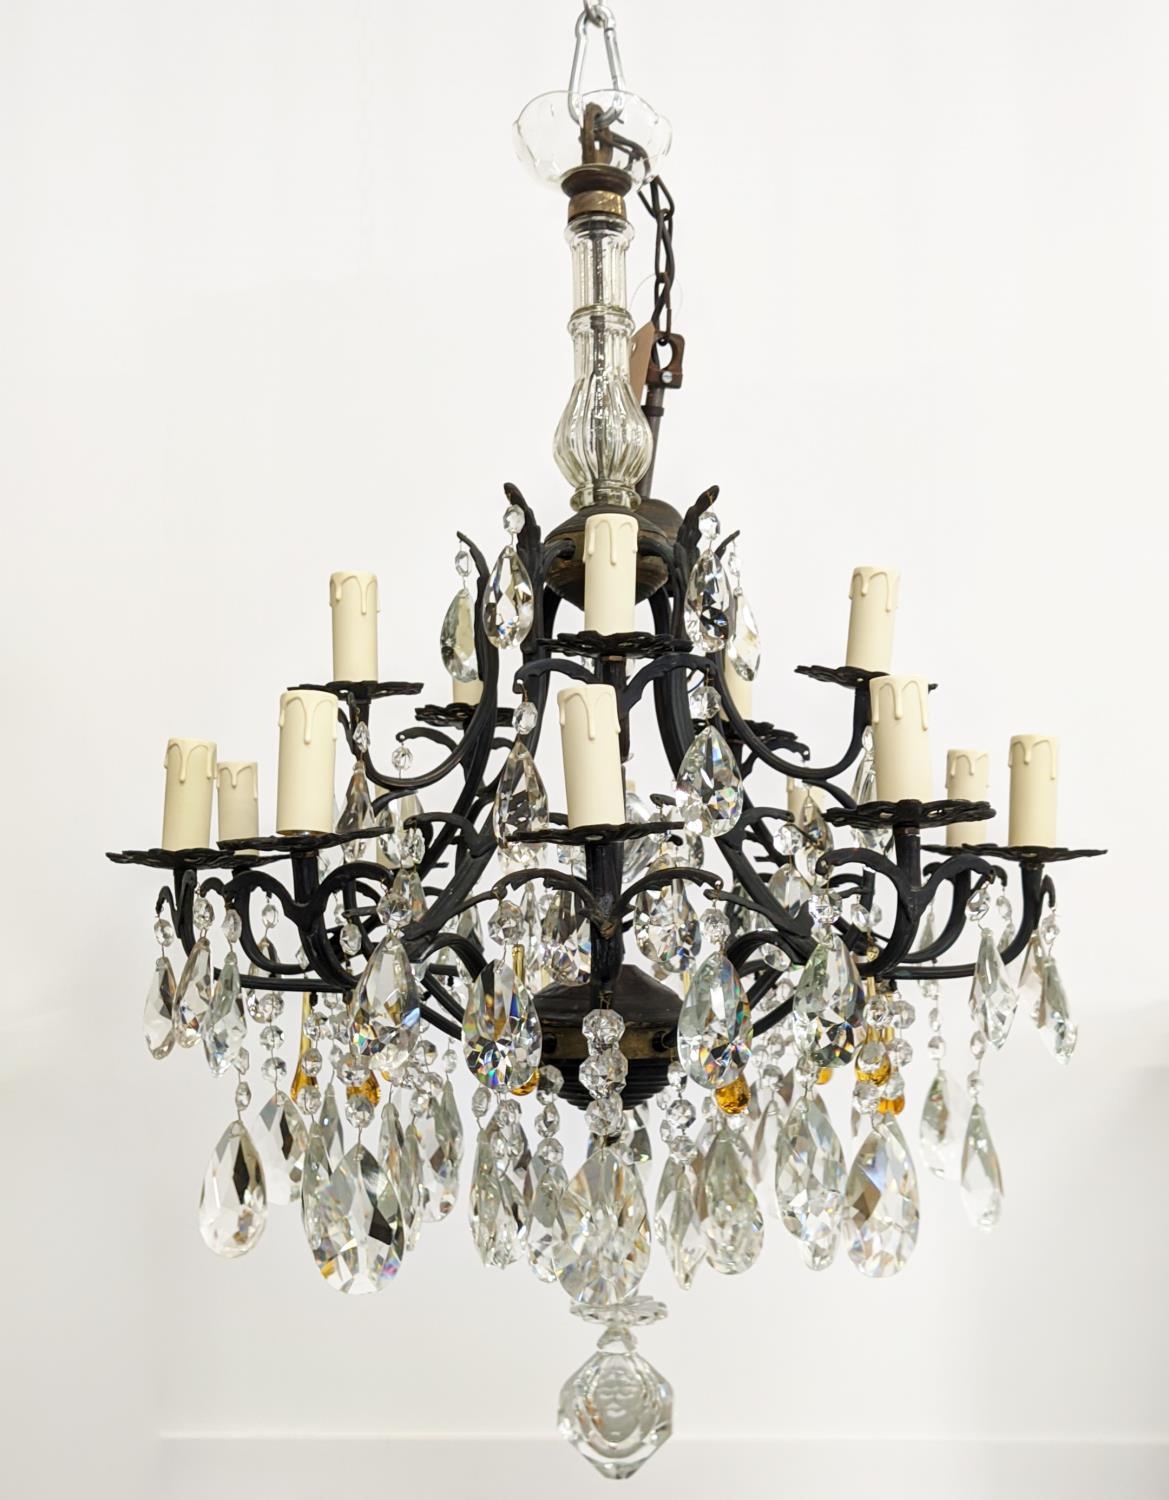 CHANDELIER, patinated metal with clear and amber glass drops from fifteen lights, 60cm W x 114cm - Image 8 of 18